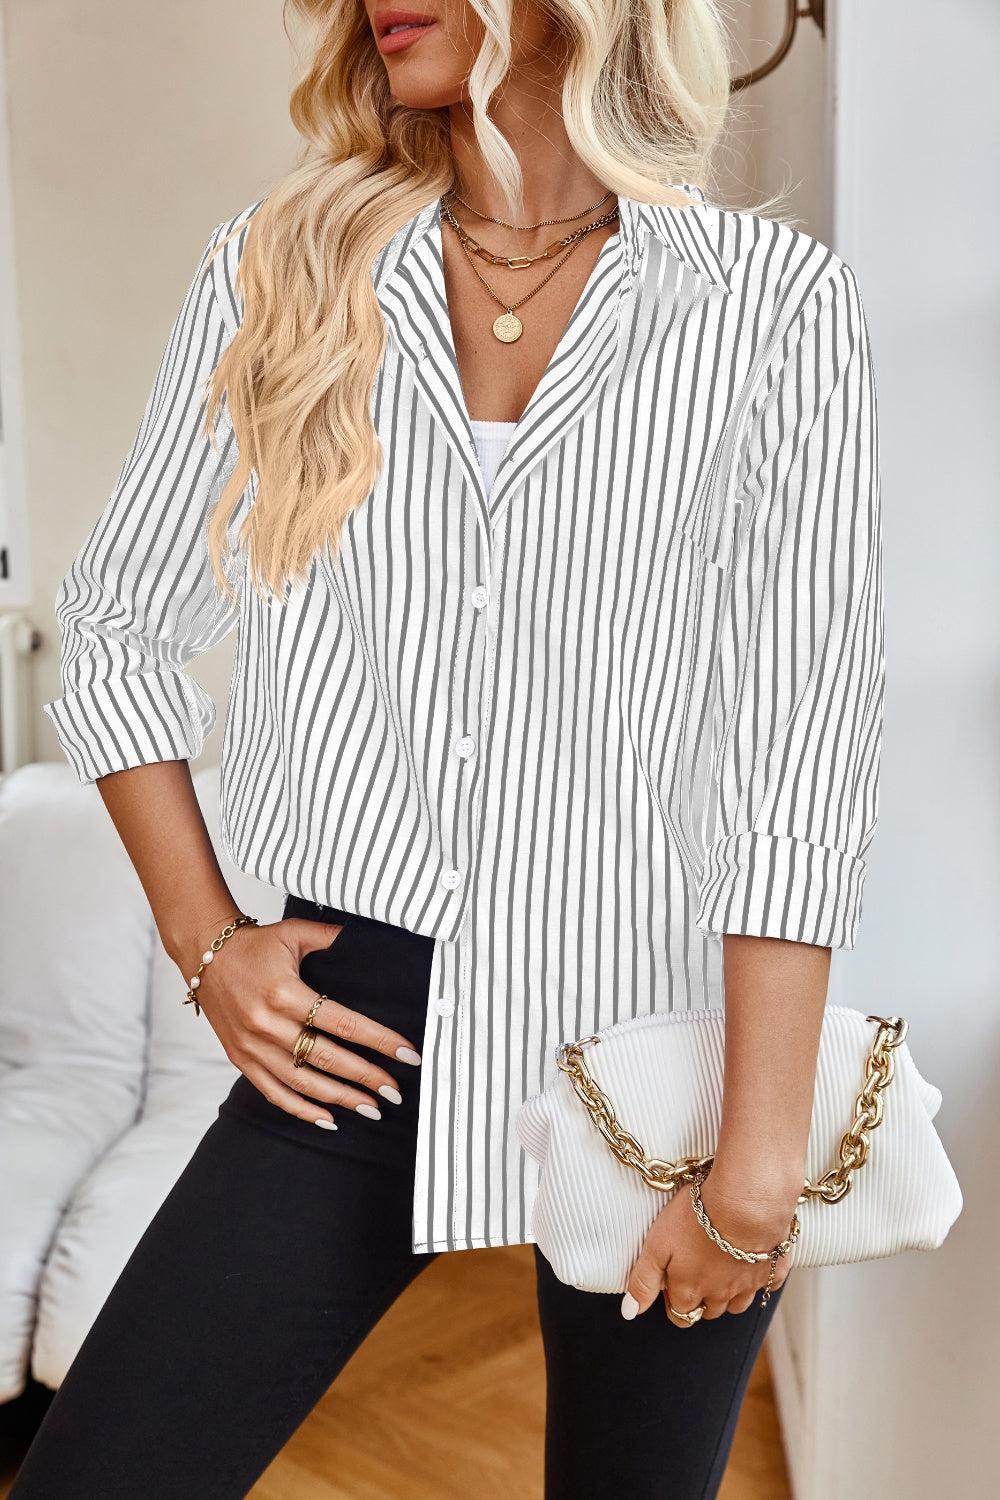 a woman wearing a white and black striped shirt